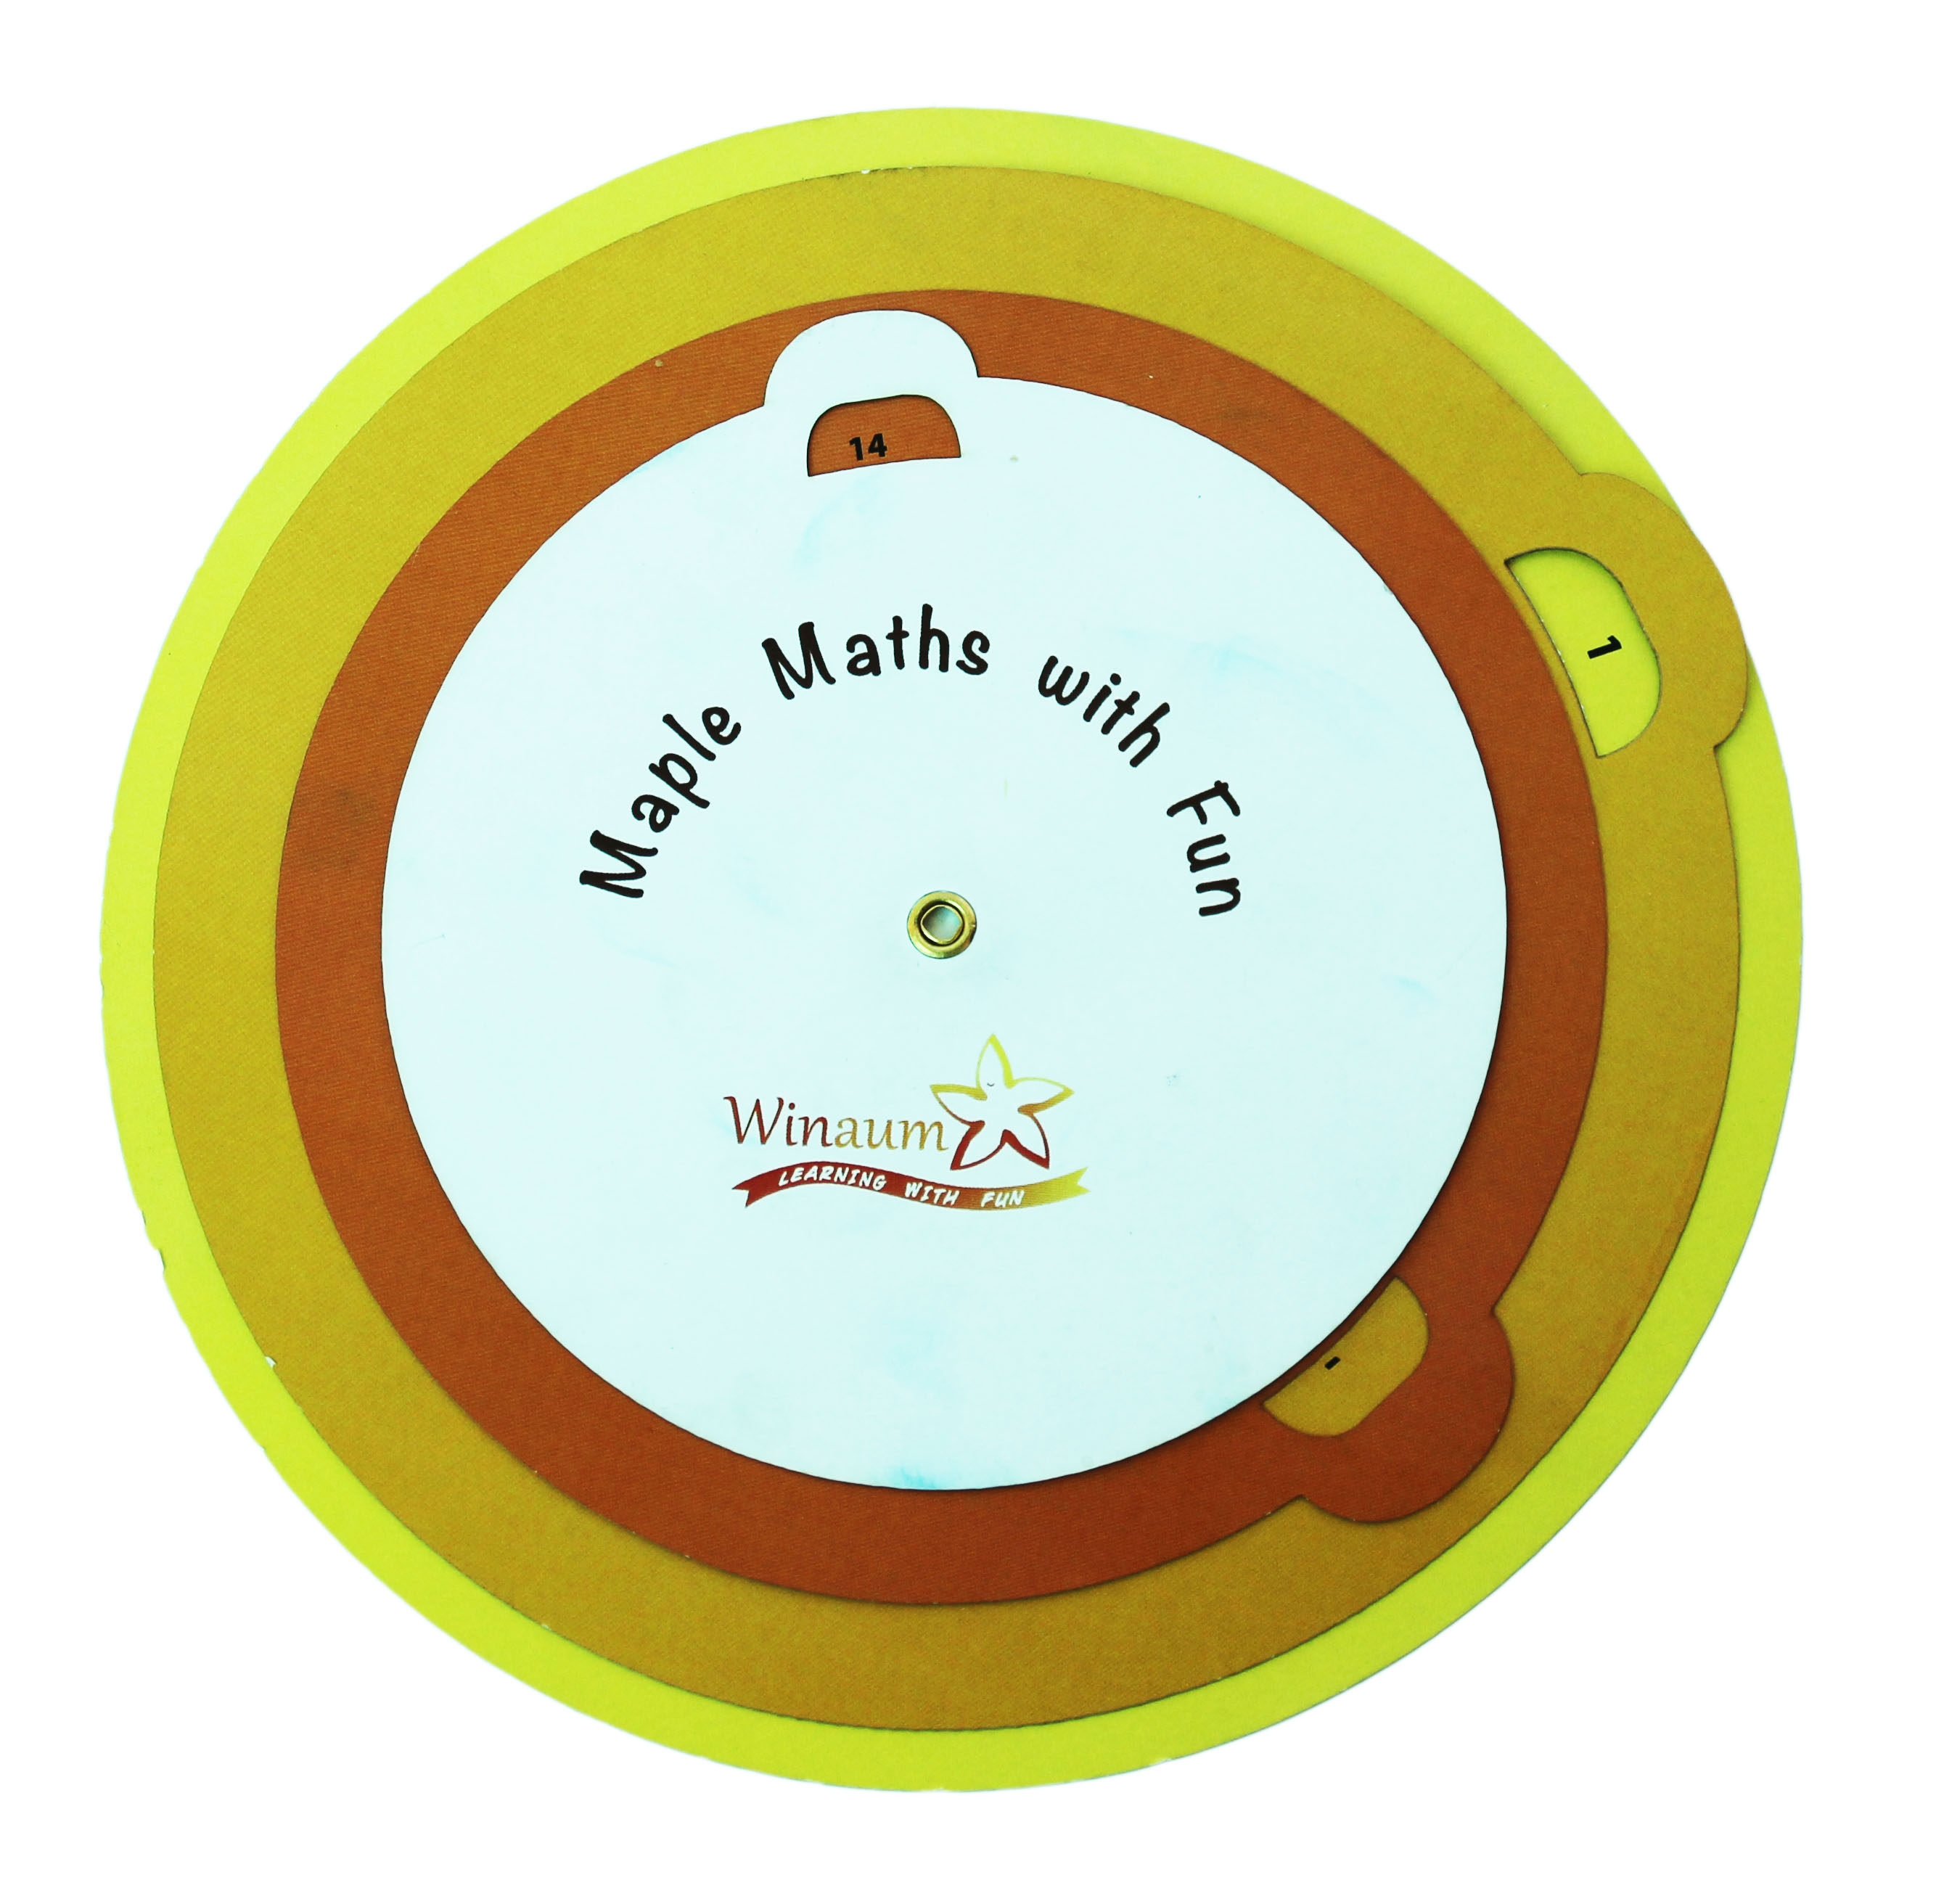 Maplemaths helps in building foundation skills in Maths, with speed techniques and games approach